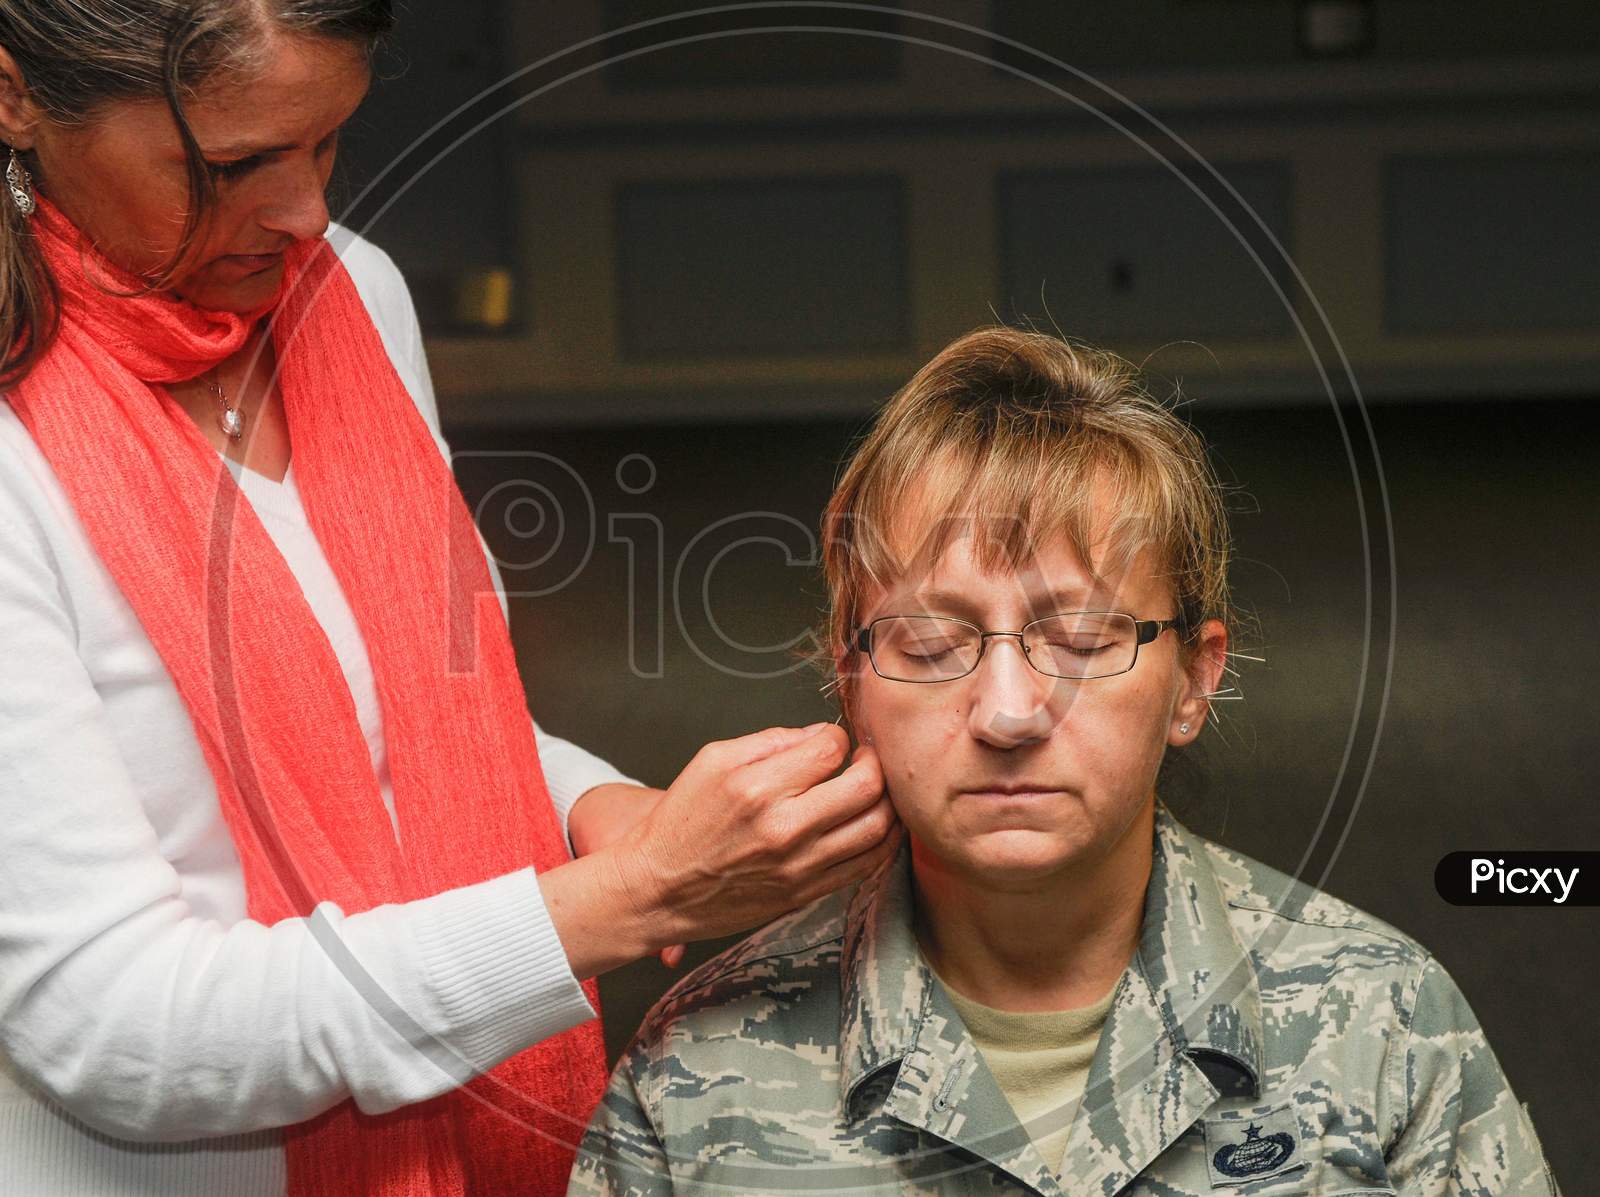 Washington - May 20 2020: A Maryland Soldier Is Conducting An Acupuncture Session To Be Able To Relax And Enjoy Tranquility As Well As For A Better Body. Healing For The Soldiers.